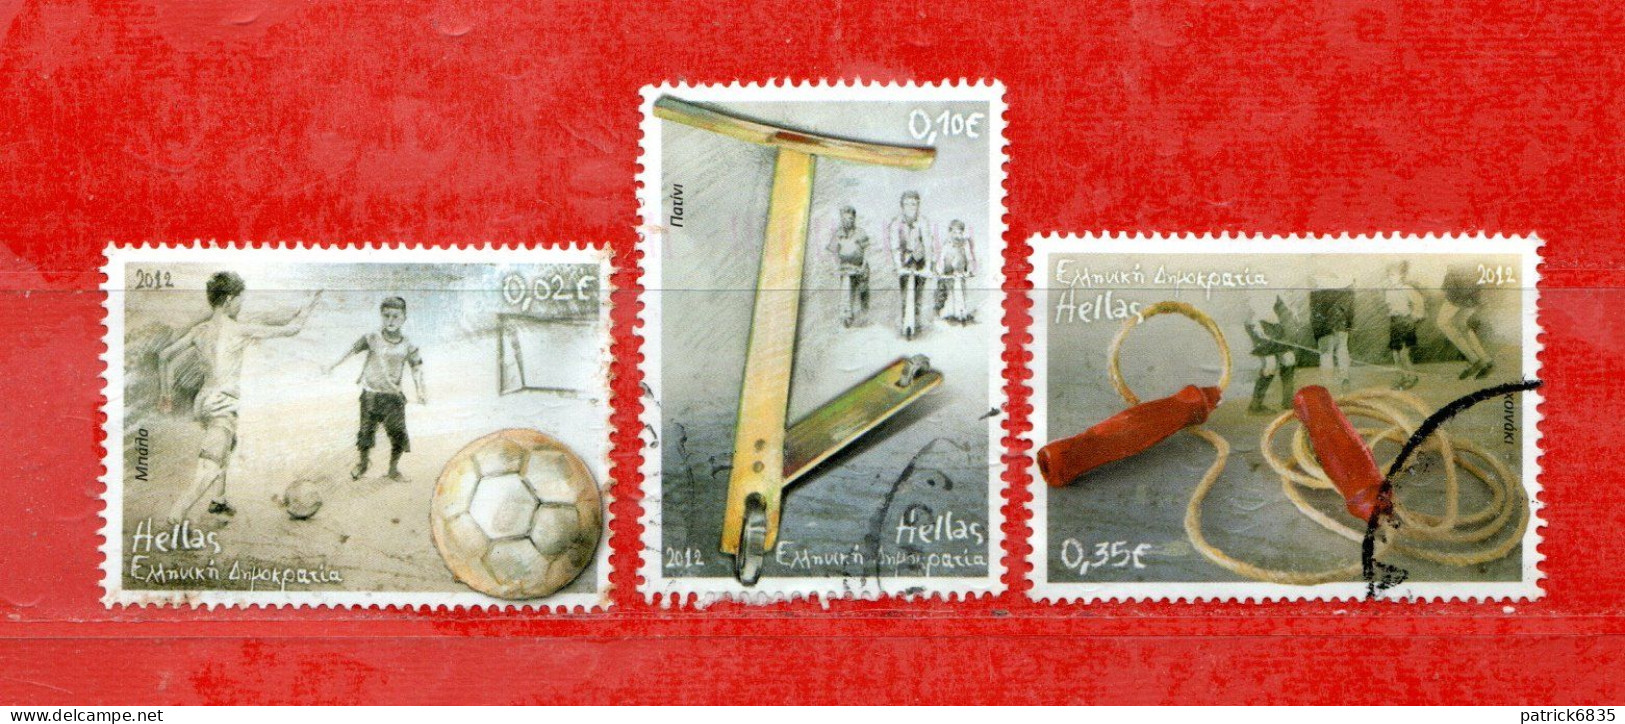 (CL.R) GRECIA ° 2012 - GAMES. Usato - Used. - Used Stamps